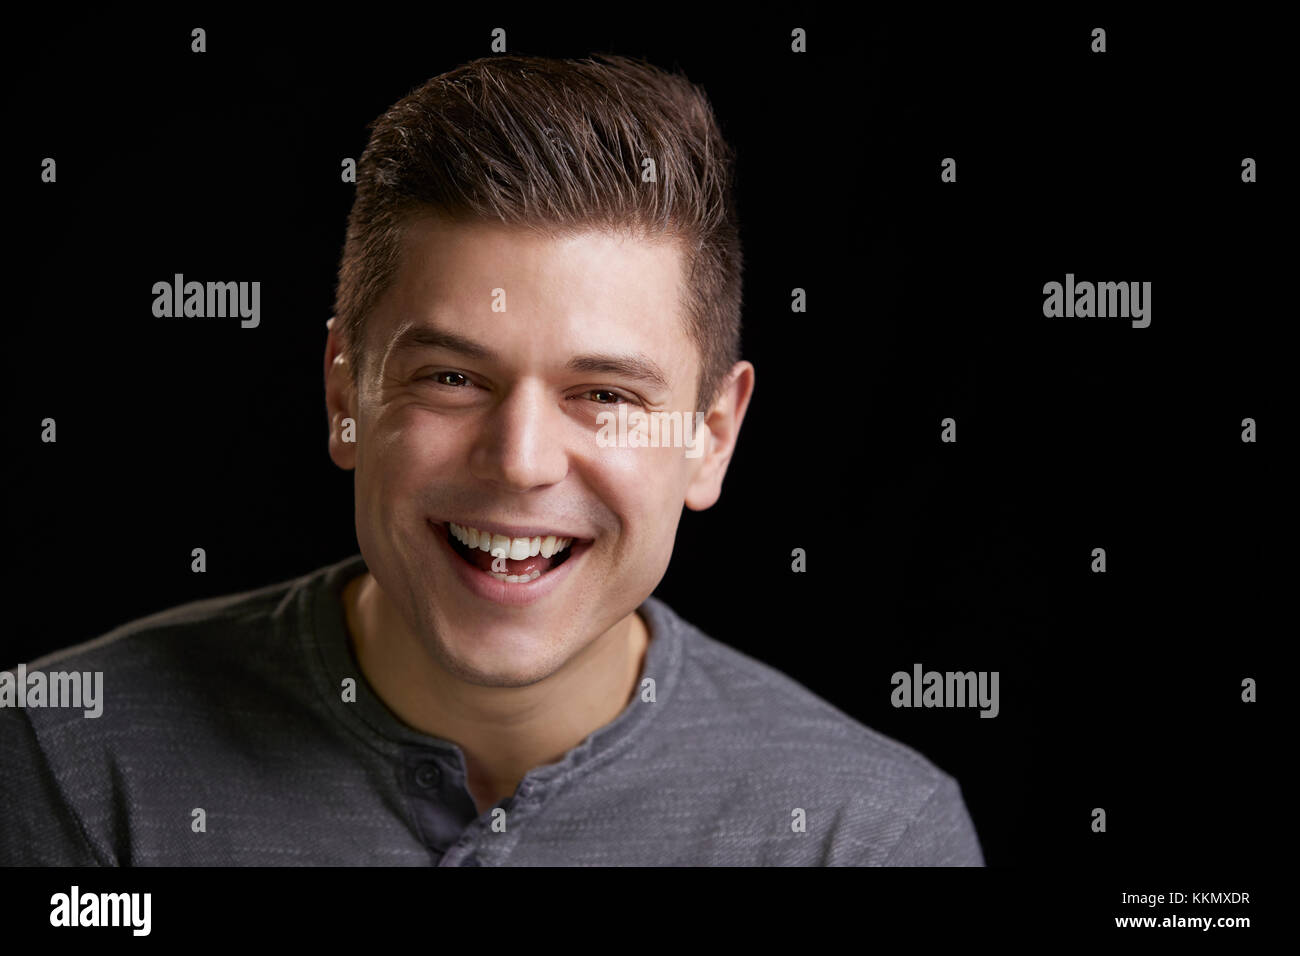 Portrait of a smiling young white man looking to camera Stock Photo